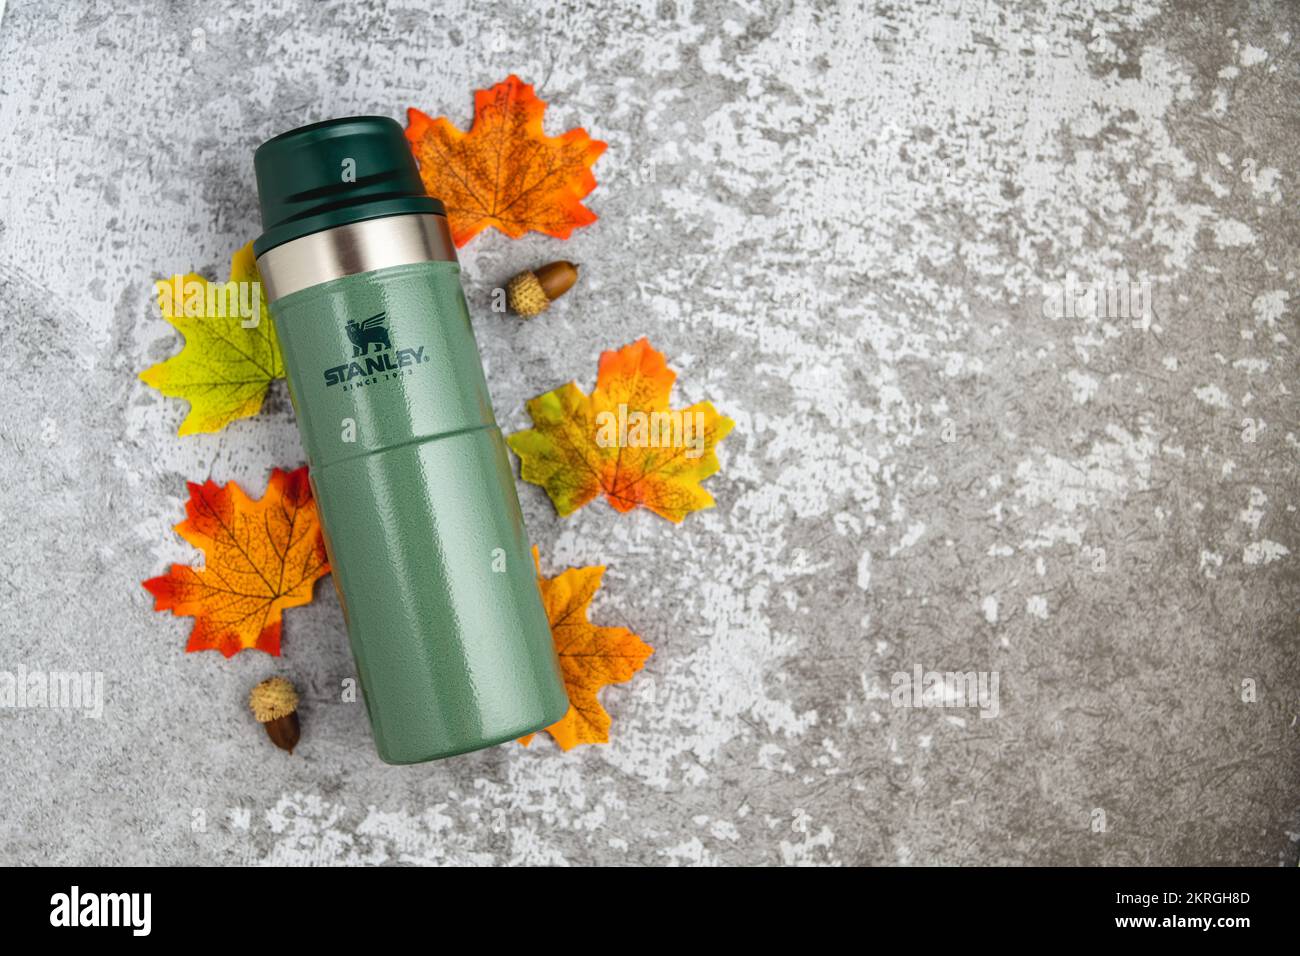 https://c8.alamy.com/comp/2KRGH8D/antalya-turkey-november-28-2022-stanley-action-trigger-thermos-mug-with-leaves-in-autumn-colors-on-stone-background-2KRGH8D.jpg